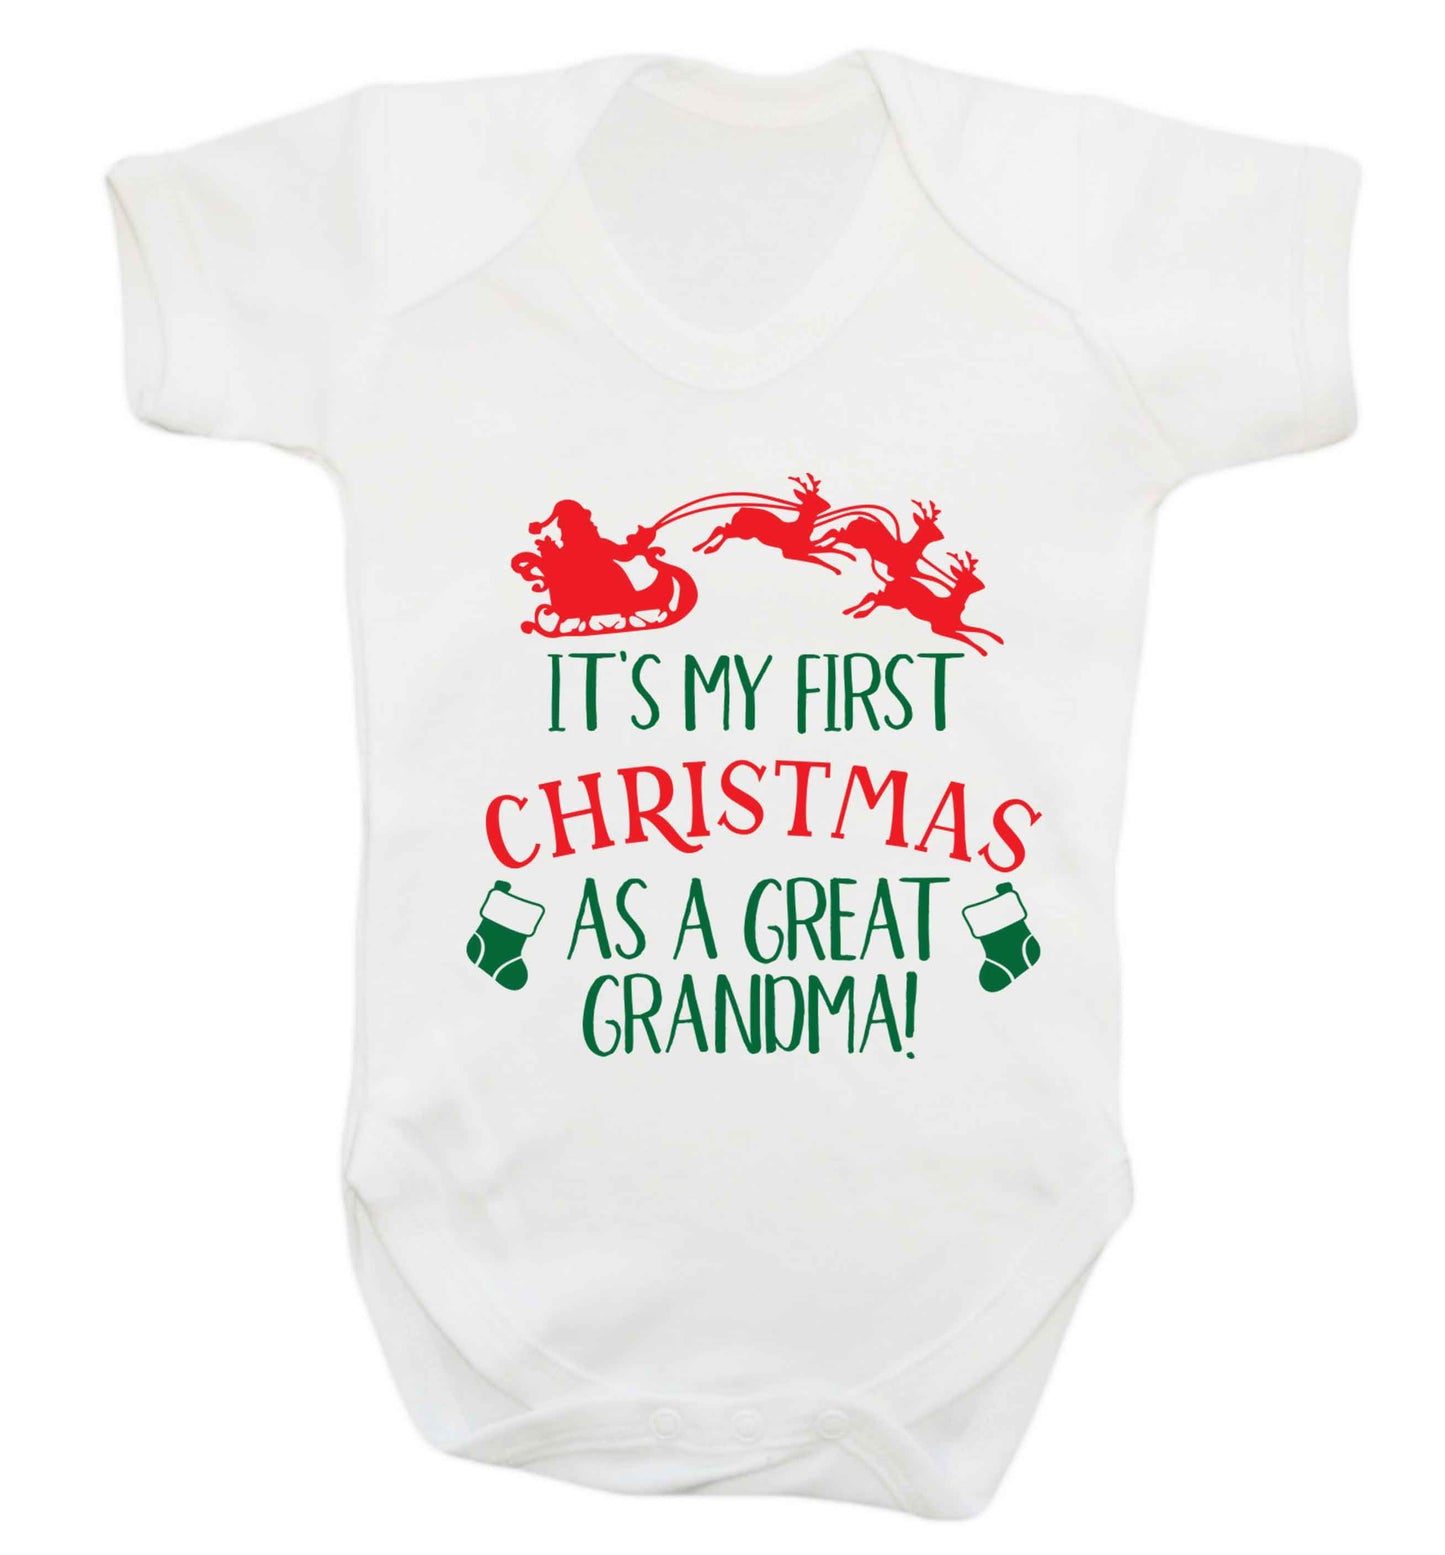 It's my first Christmas as a great grandma! Baby Vest white 18-24 months